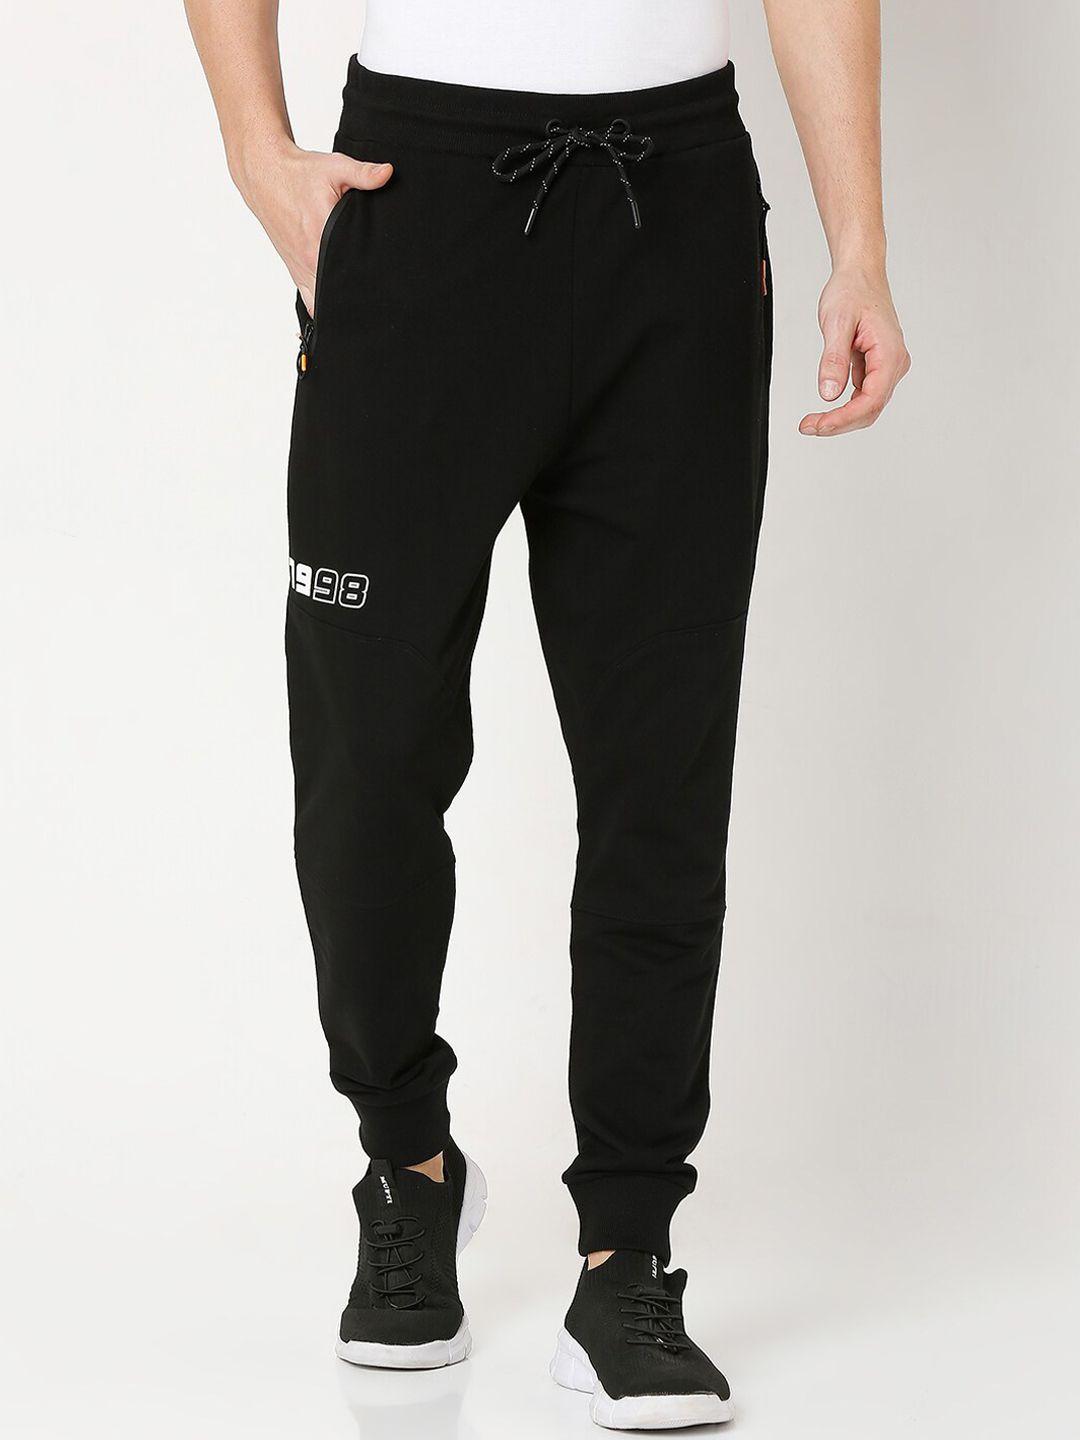 mufti-men-black-loose-fit-joggers-trousers